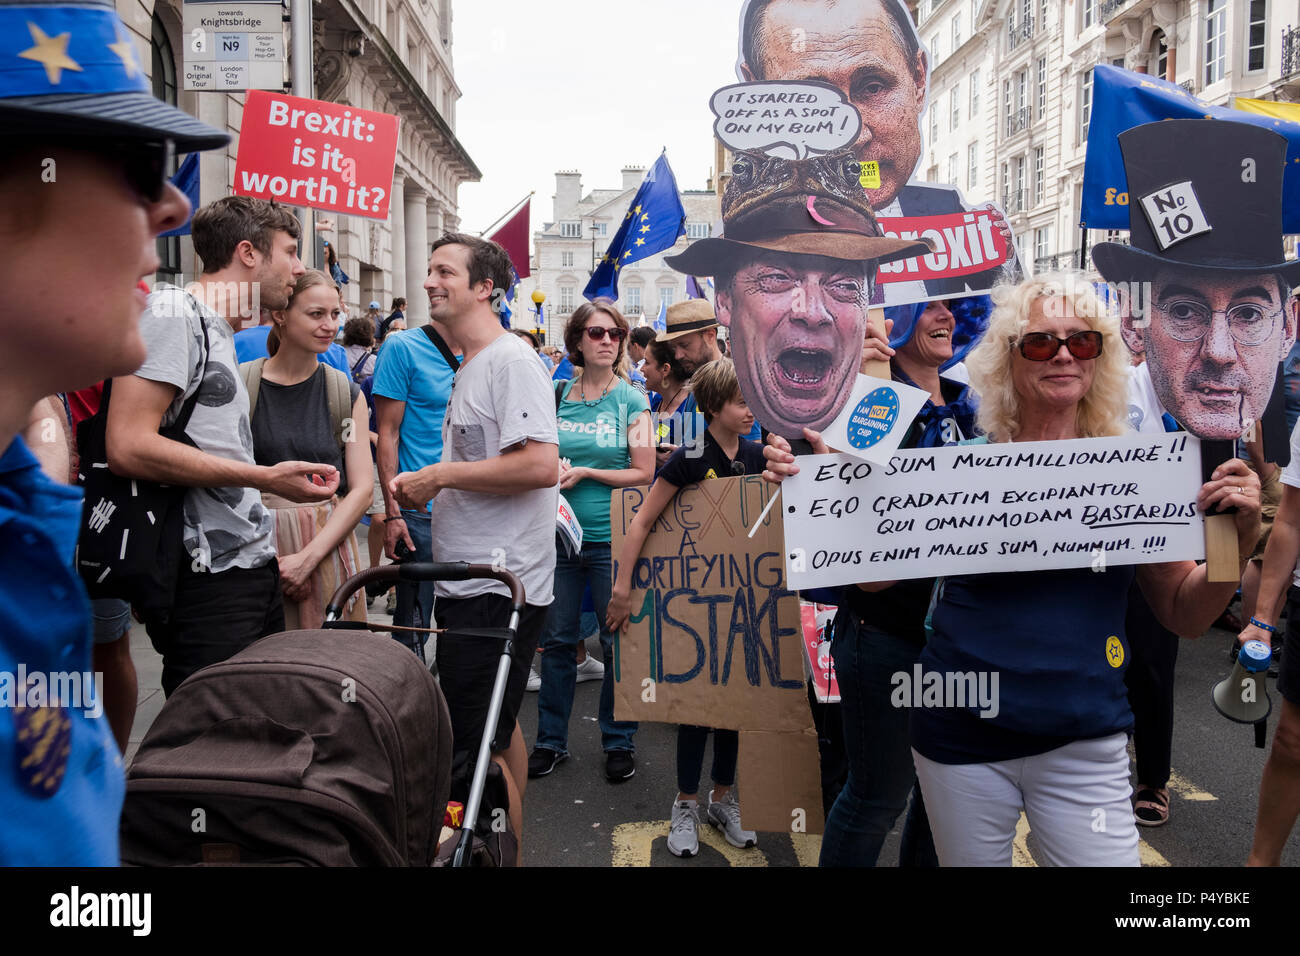 London, UK. 23rd June 2018. More than 100,000 people have marched through central London to demand a final vote on any UK exit deal, on the second anniversary of the Brexit vote. Anti-Brexit marchers travelled from across the country to join the rally, organised by a number of Westminster-based and grassroots lobbying groups and marks the launch of a nationwide petition for a “People's Vote”. London, UK. 23 June 2018 Credit: Mike Abrahams/Alamy Live News Stock Photo